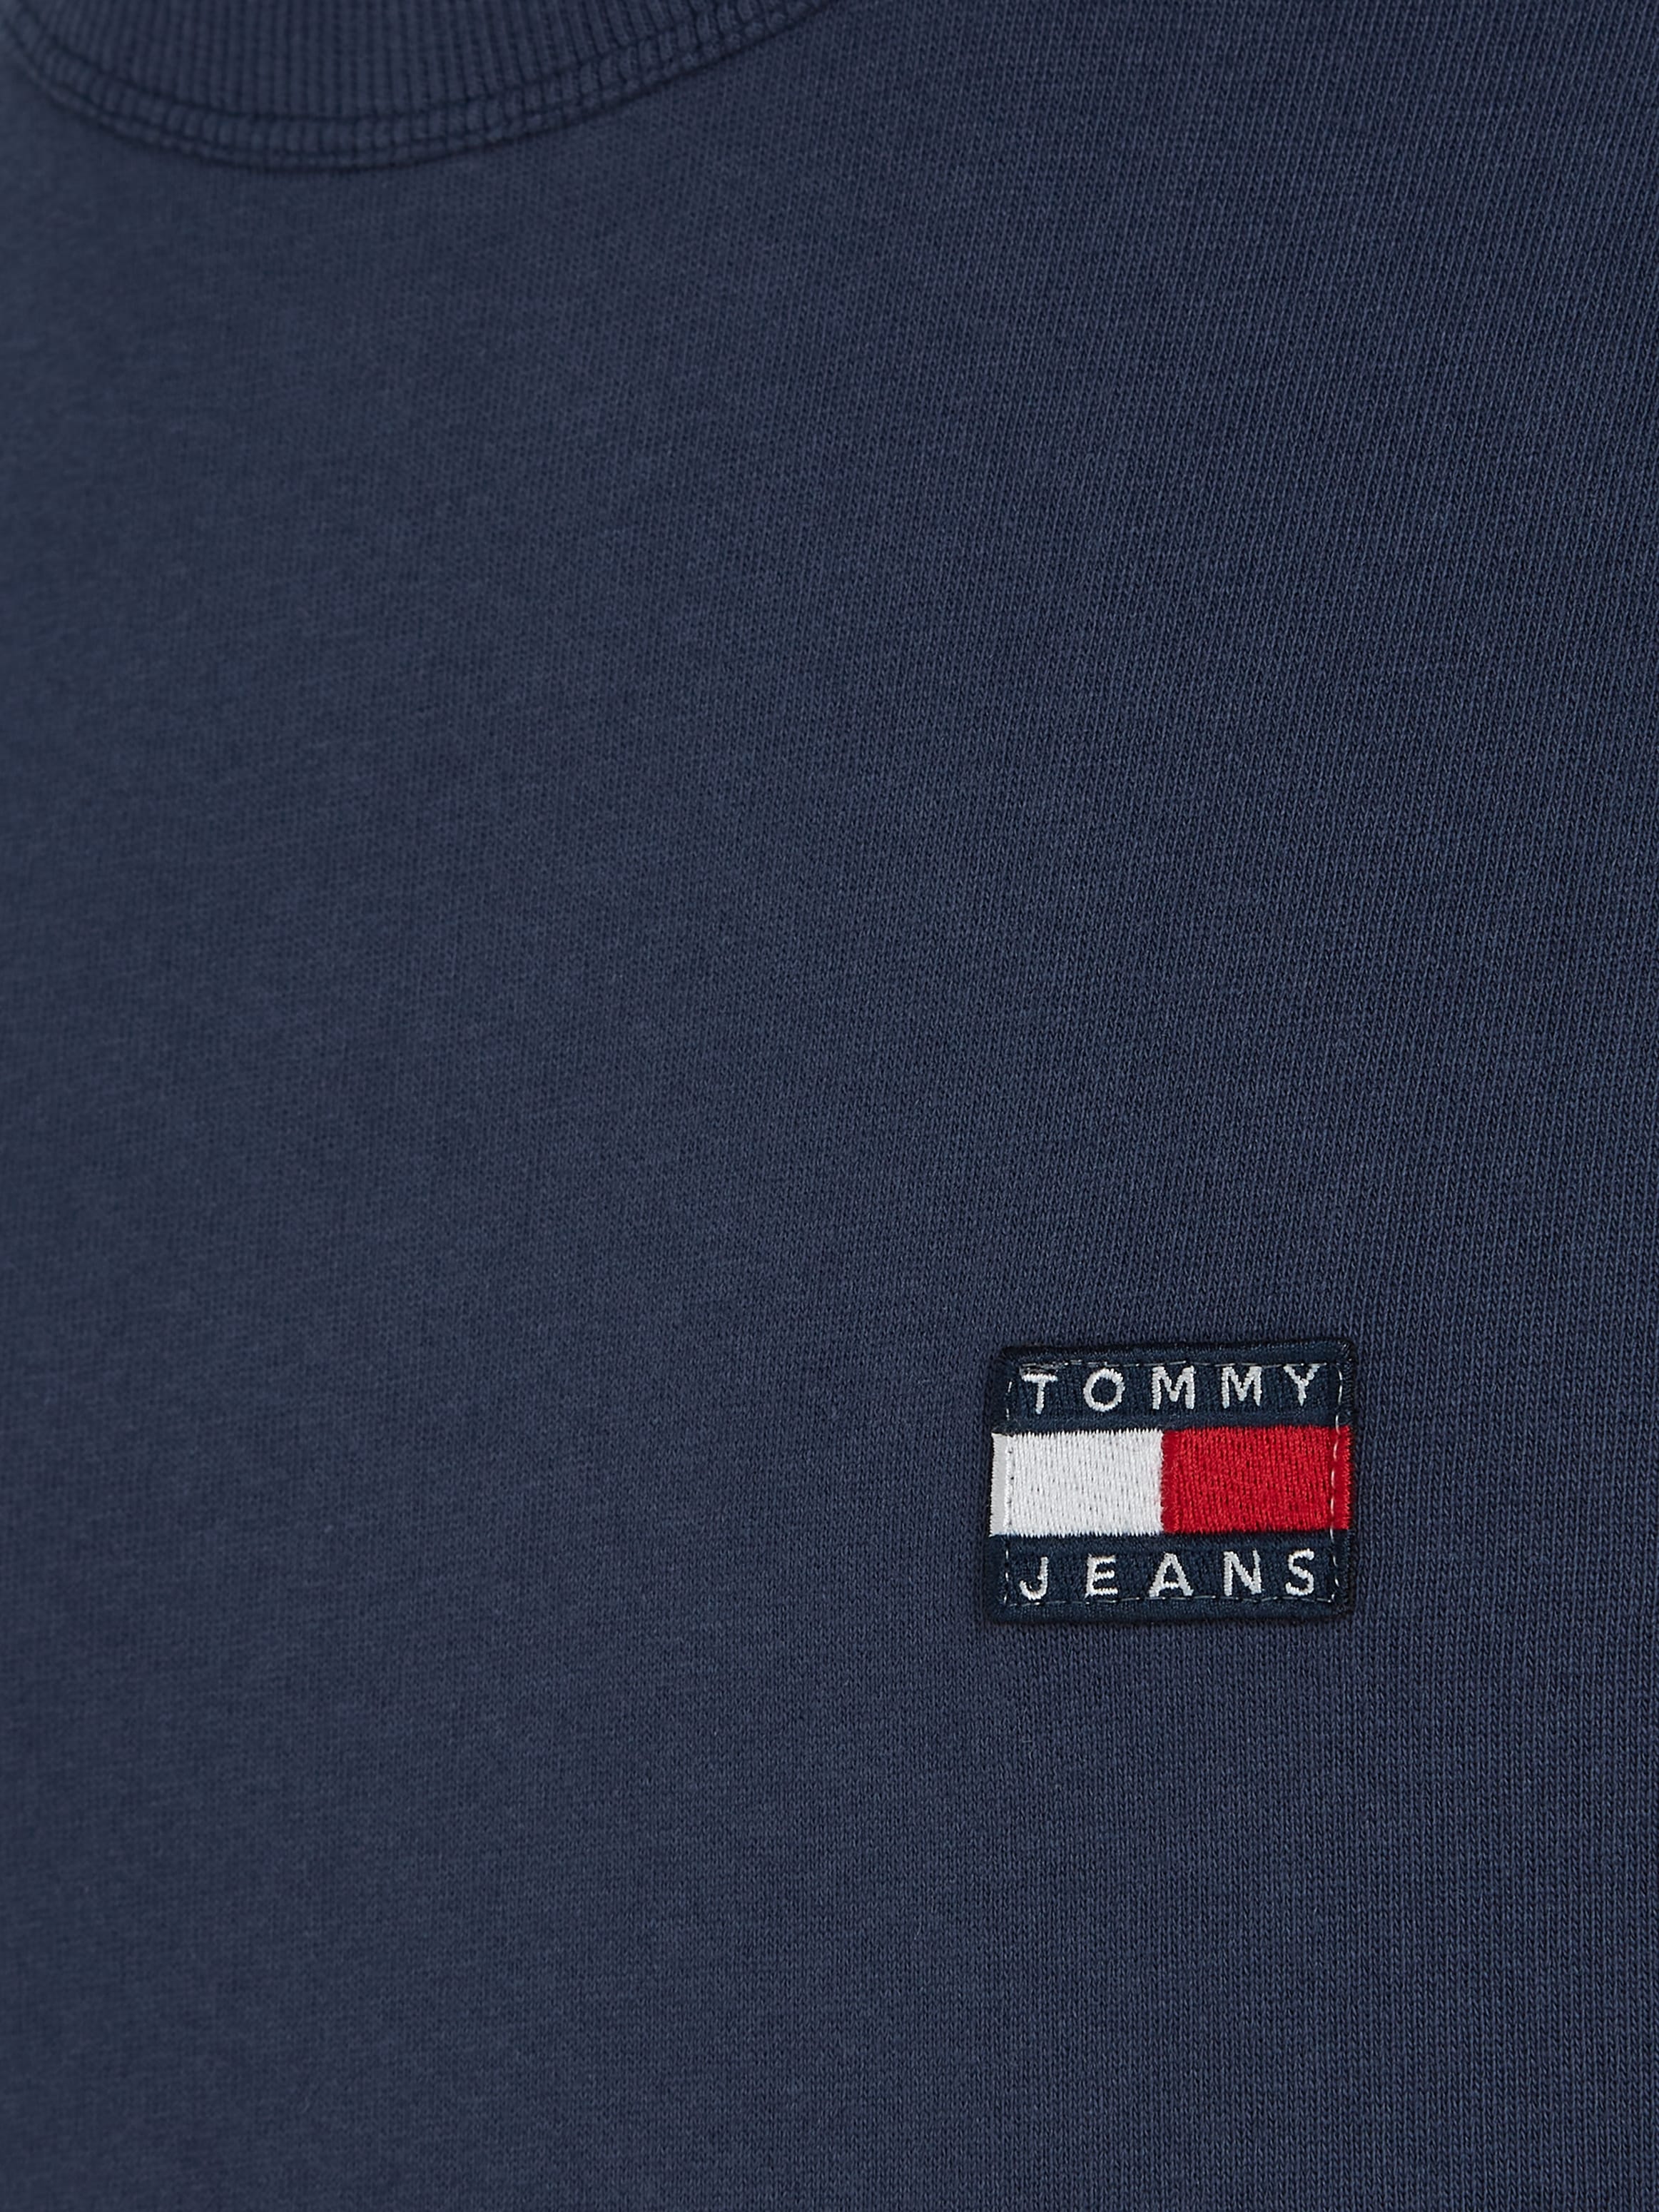 Tommy T-Shirt TOMMY shoppen bei BADGE XS TEE« OTTO »TJM CLSC online Jeans